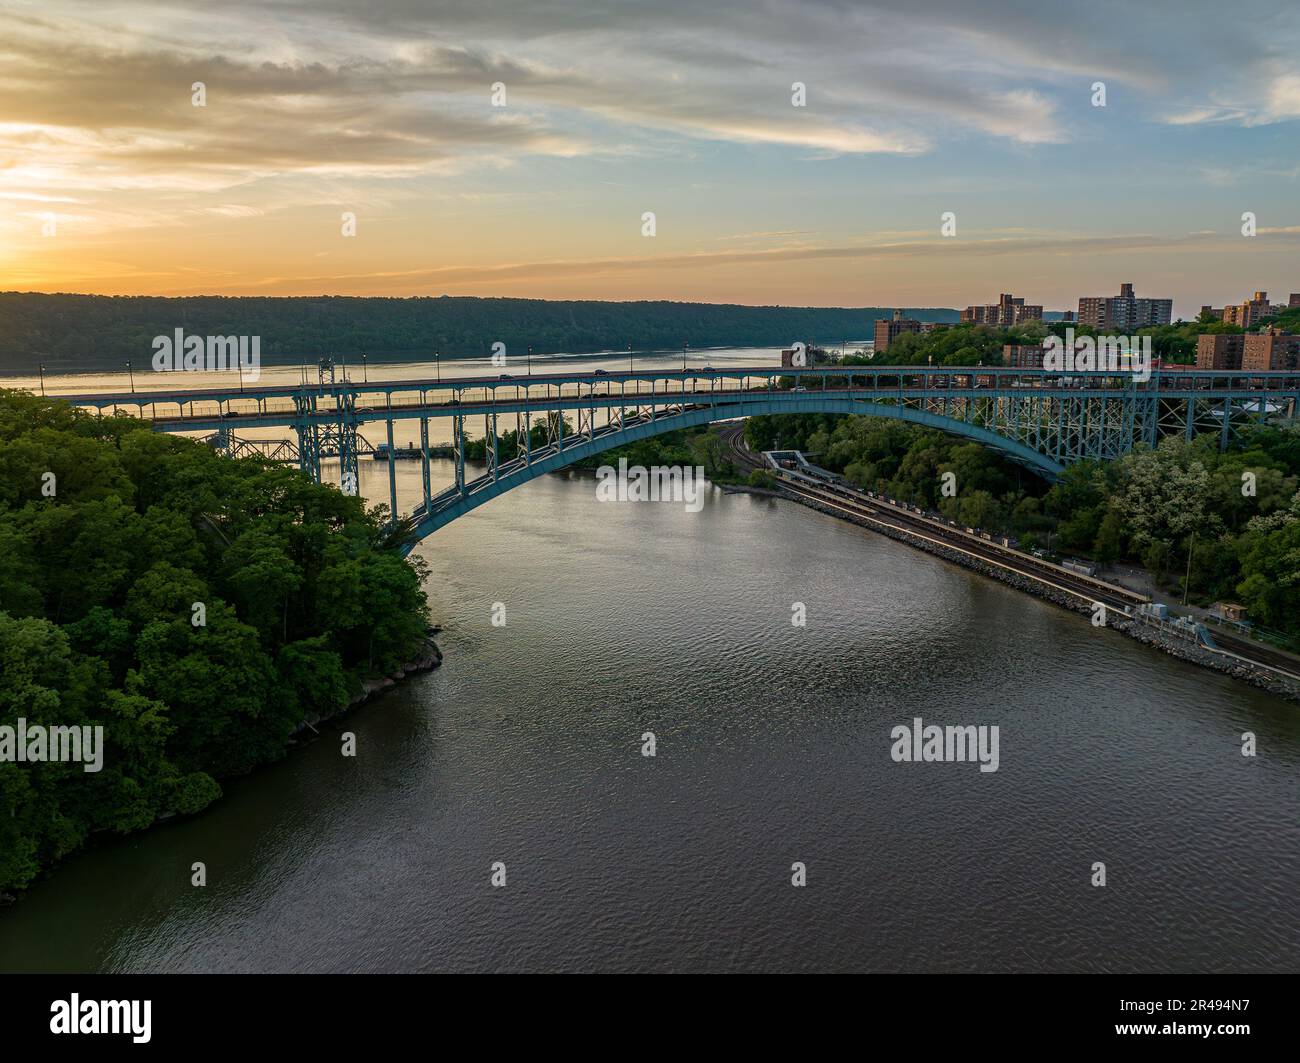 An aerial view of the Henry Hudson Bridge, crossing the Spuyten Duyvil Creek at sunset in New York. Stock Photo